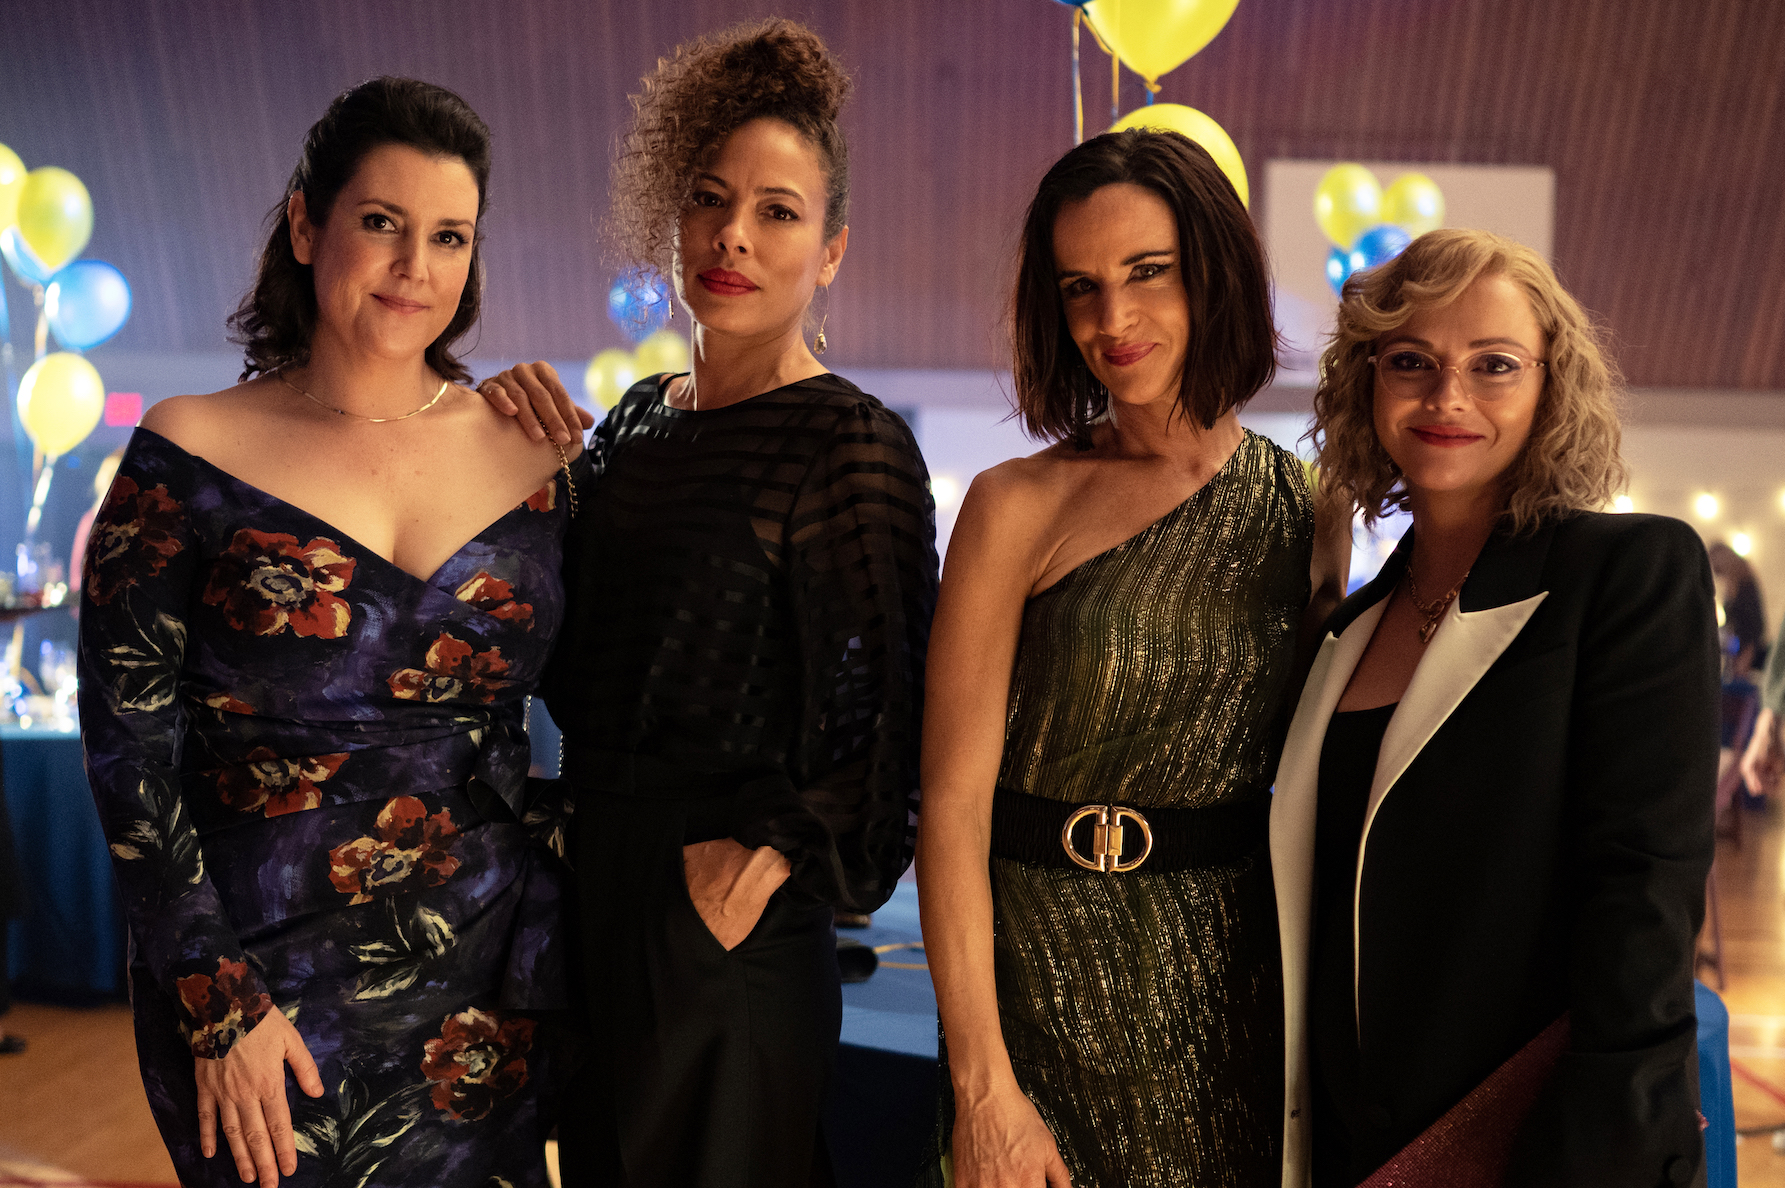 Melanie Lynskey as Shauna, Tawny Cypress as Taissa, Juliette Lewis as Natalie, and Christina Ricci as Misty from the 'Yellowjackets' cast standing side by side in formal clothing and smiling